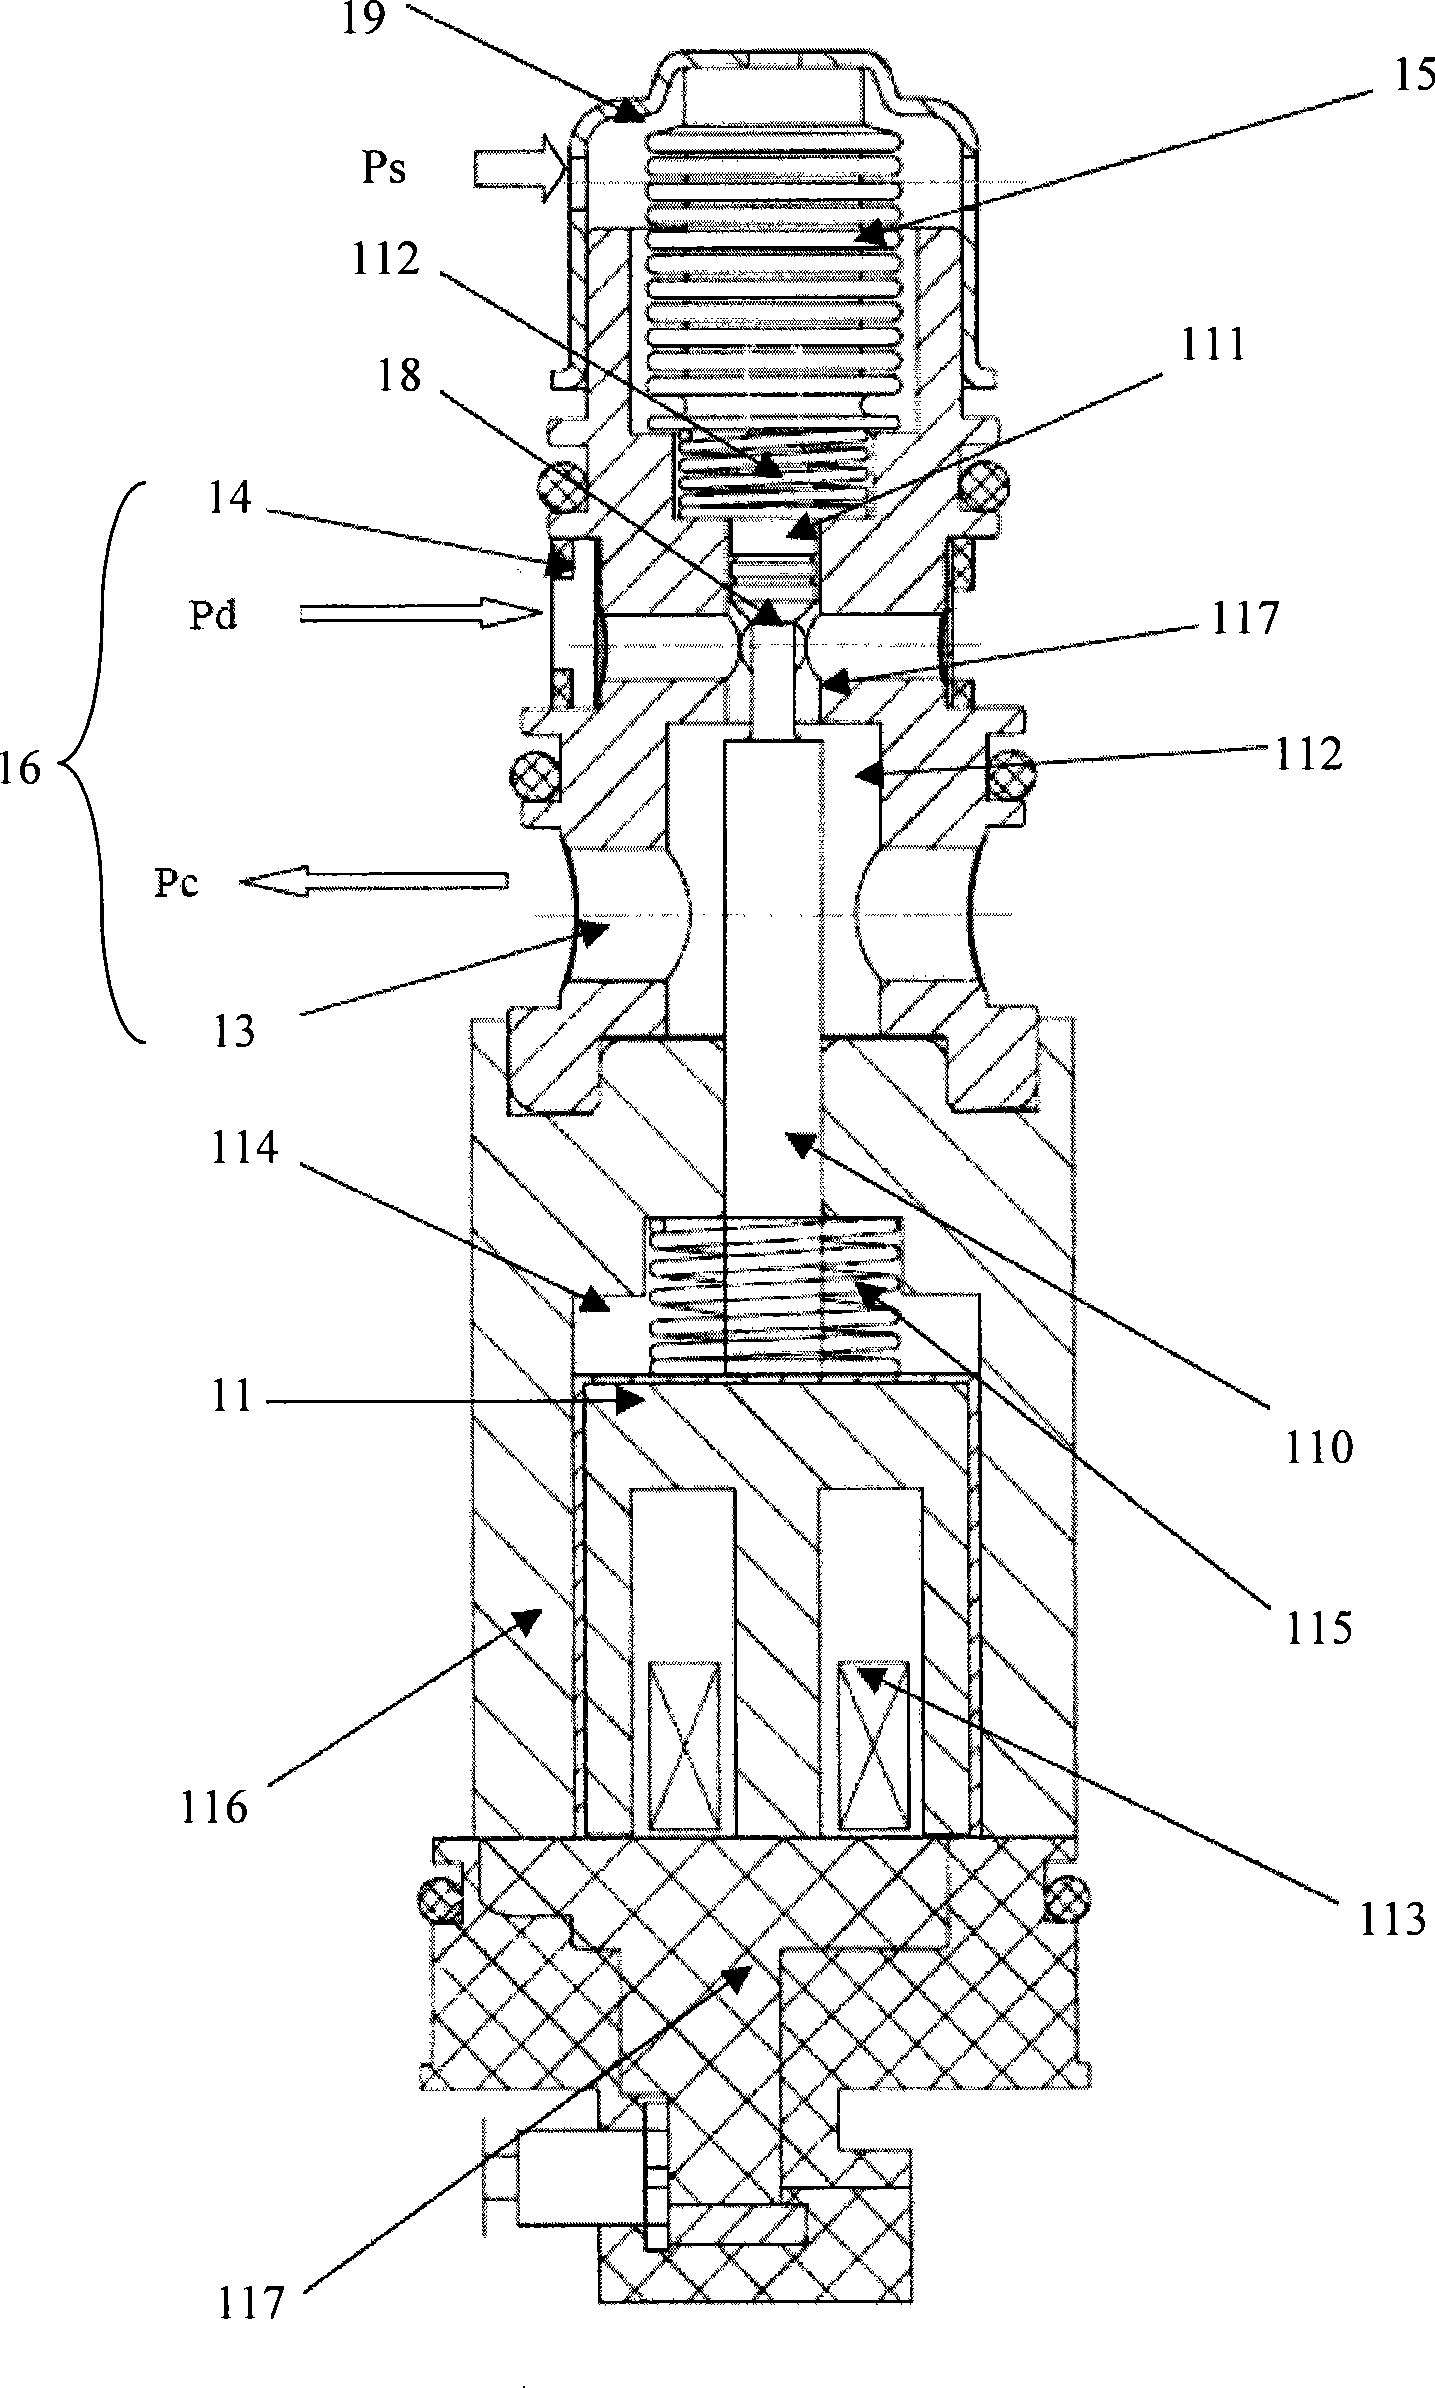 Electrical controlled valve of variable displacement compressor